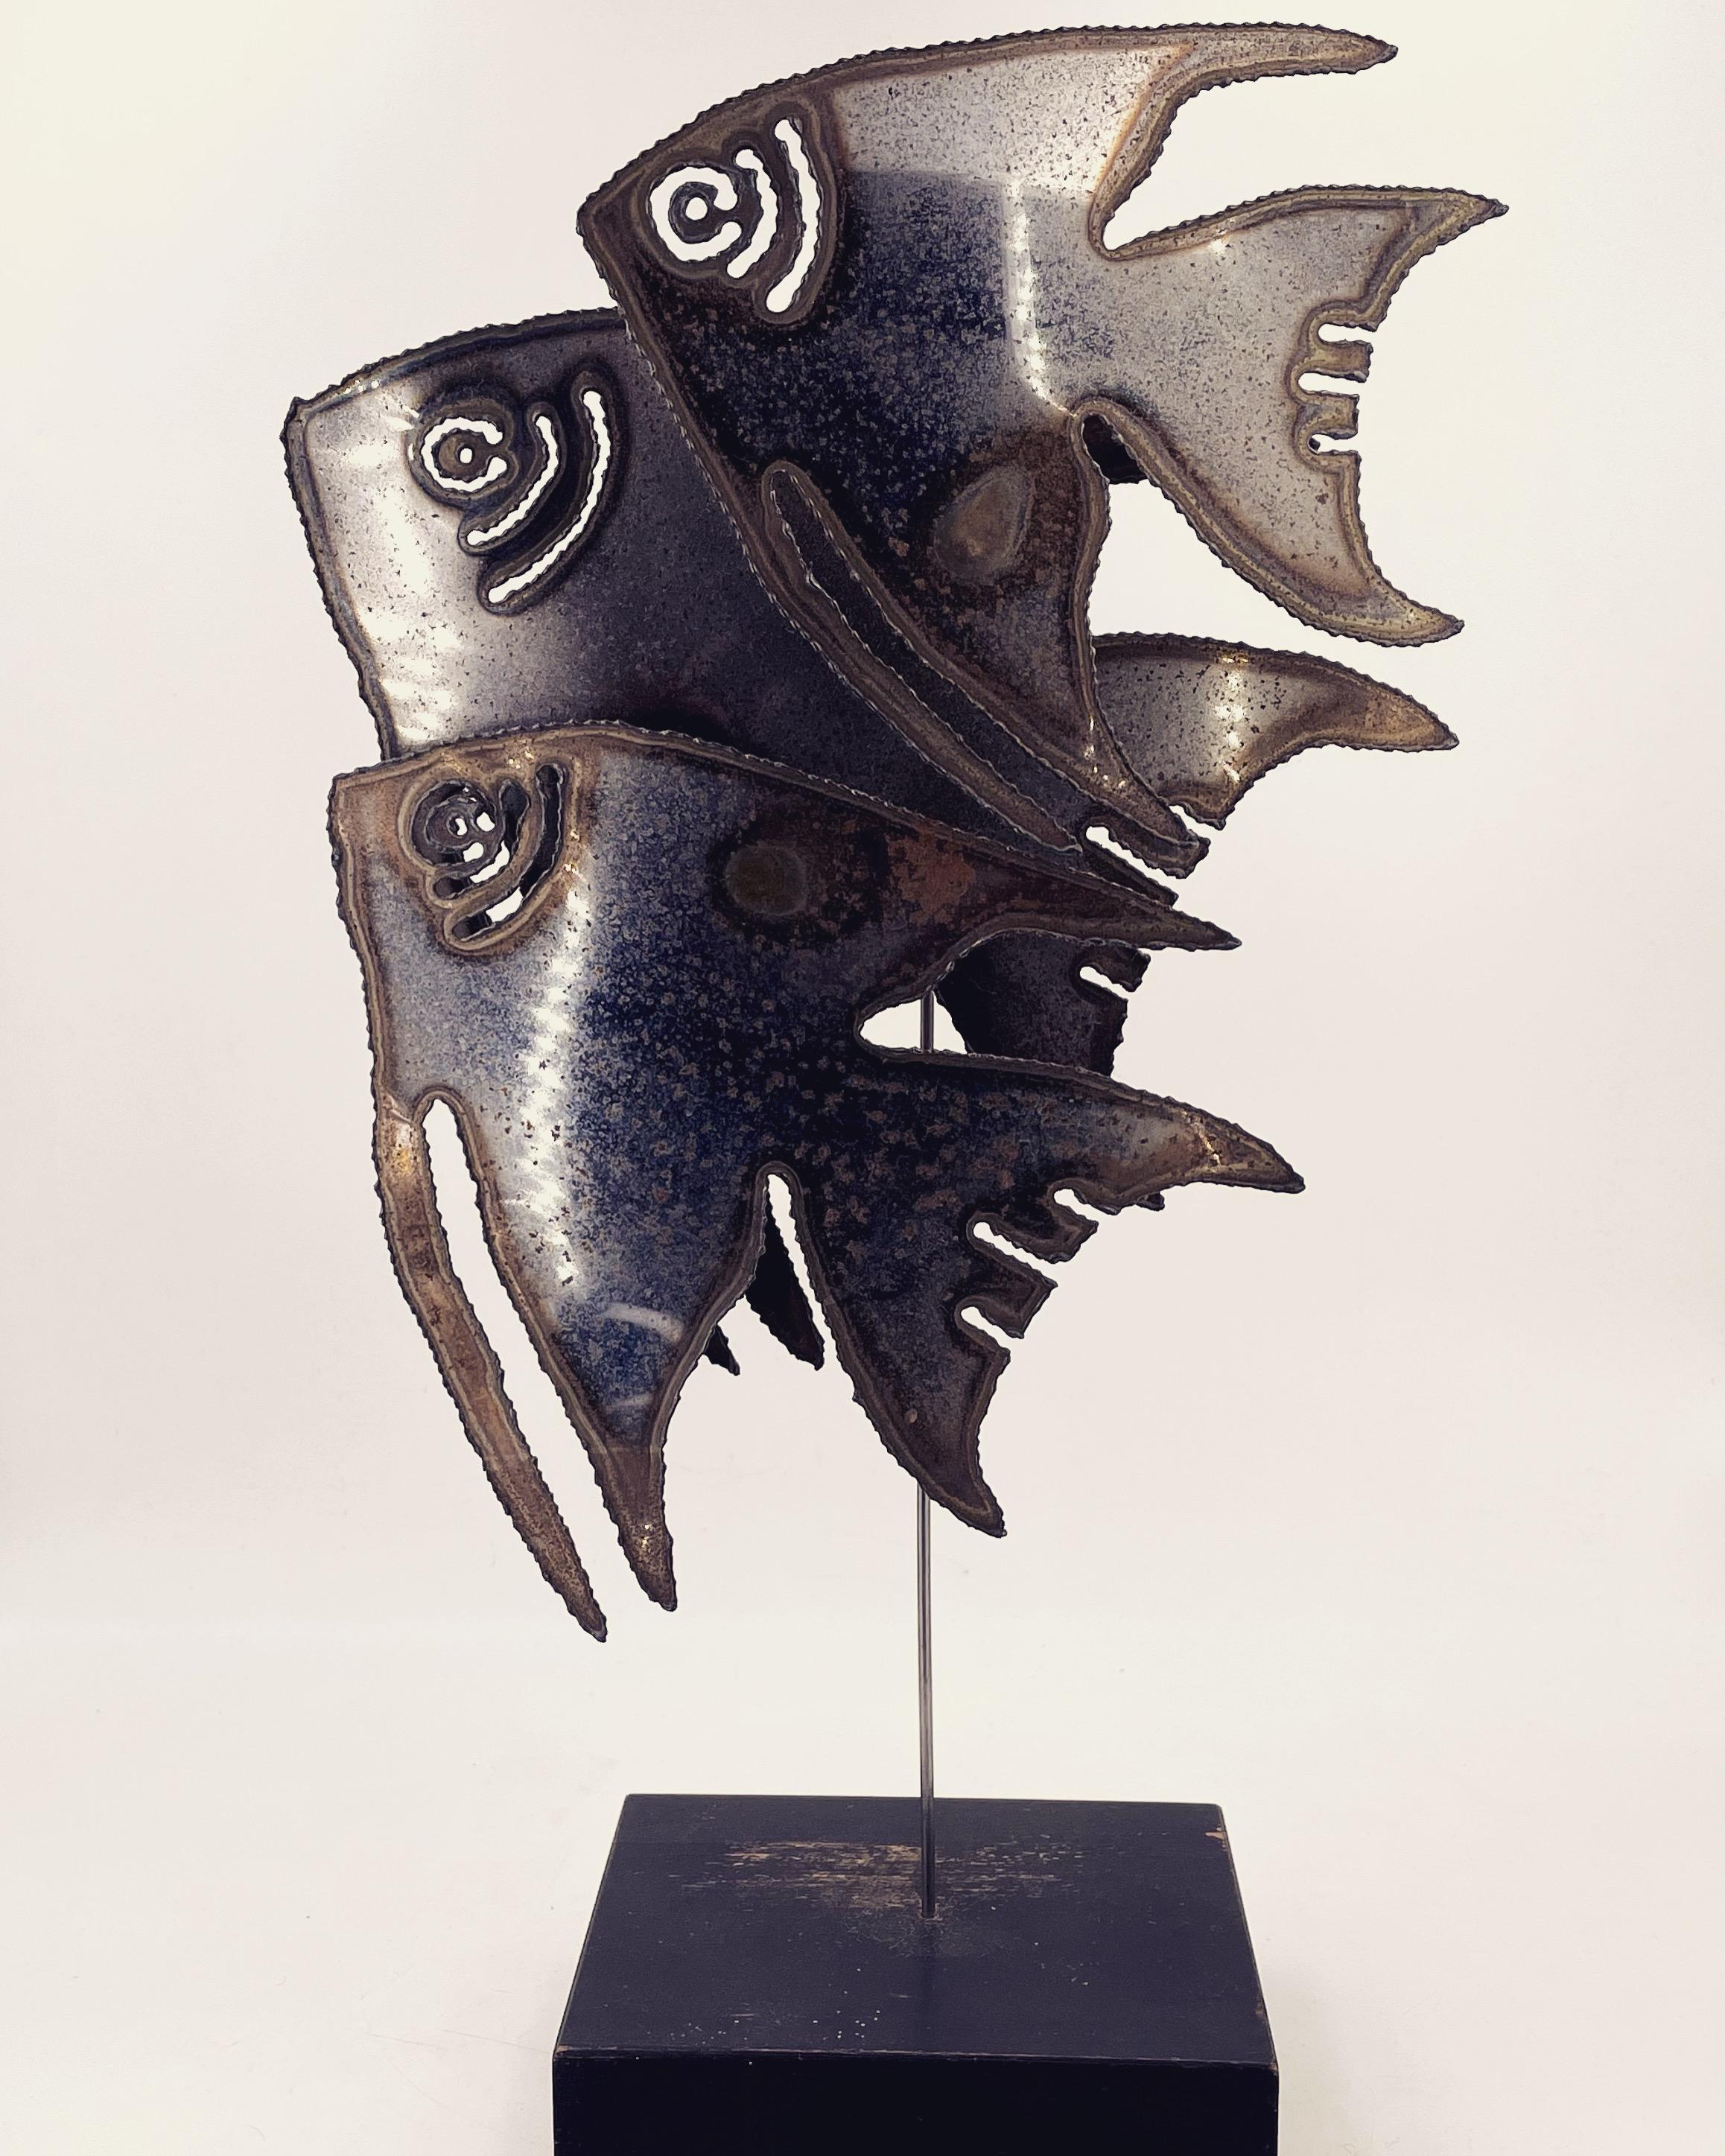 Cool and unique metal school of fish sculpture circa 1970s in chrome finish, sitting on black painted wood base, some light rust and wear shown due to age.